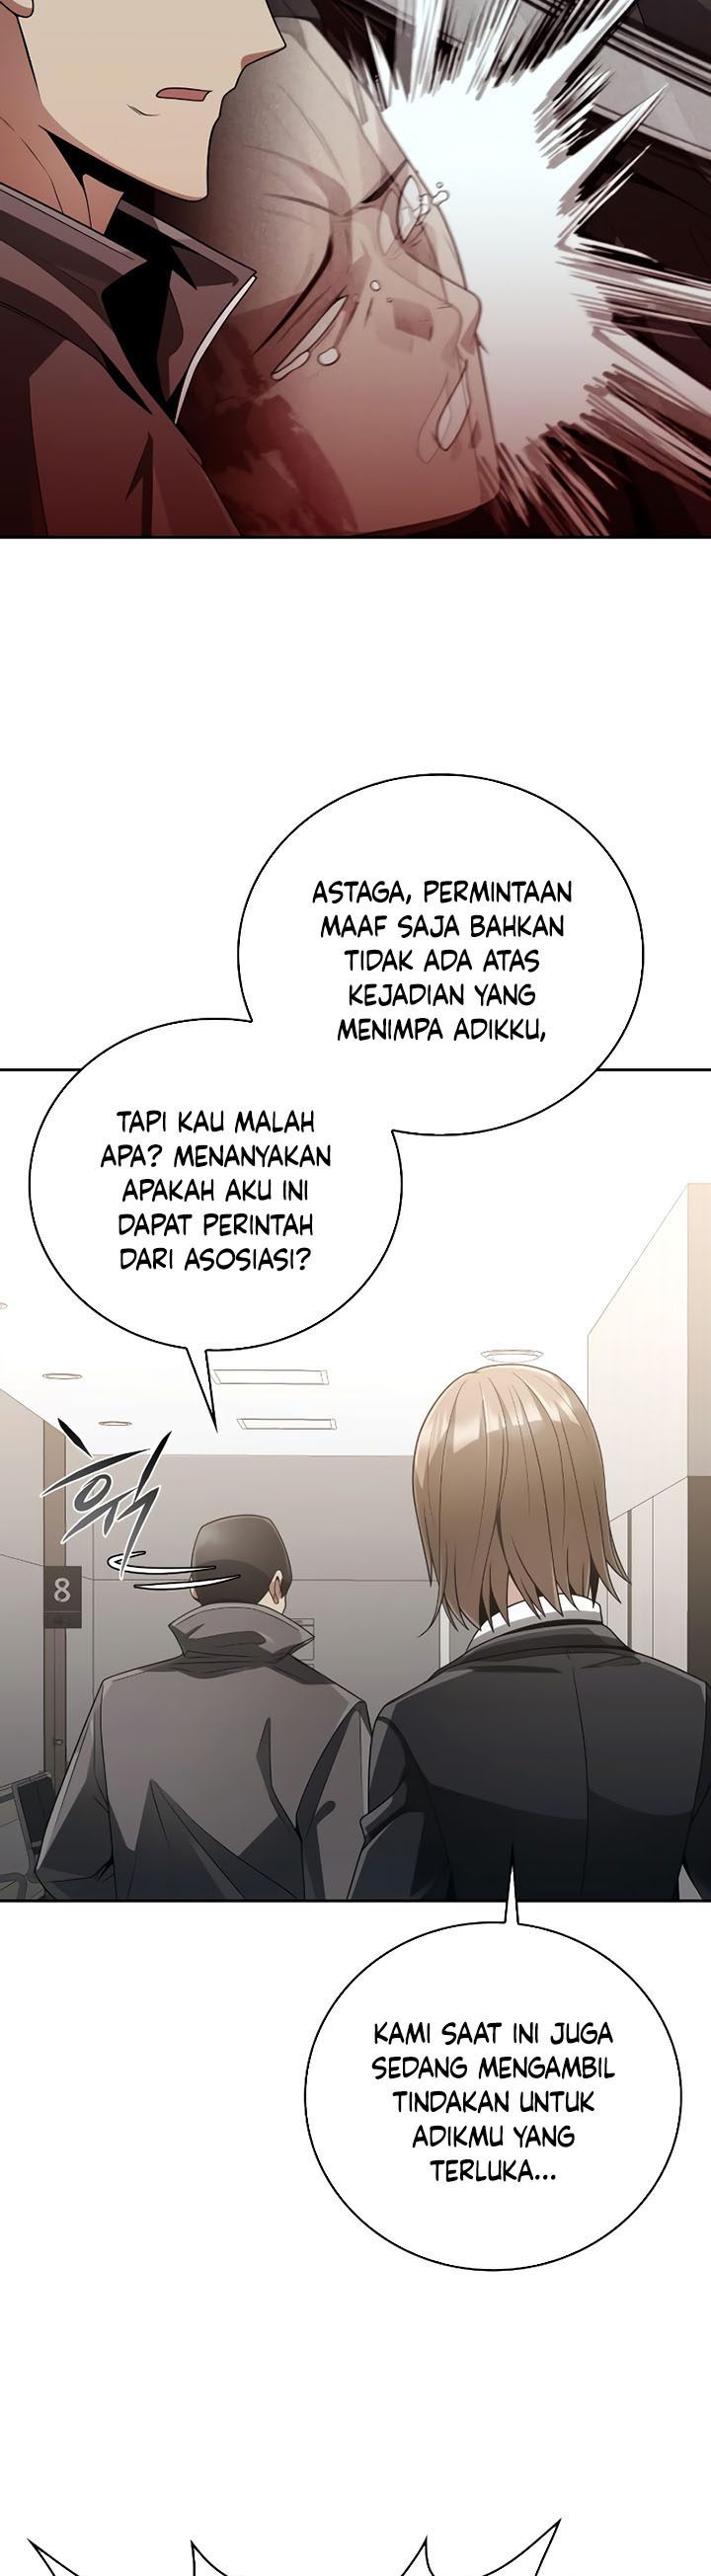 Dilarang COPAS - situs resmi www.mangacanblog.com - Komik clever cleaning life of the returned genius hunter 021 - chapter 21 22 Indonesia clever cleaning life of the returned genius hunter 021 - chapter 21 Terbaru 14|Baca Manga Komik Indonesia|Mangacan